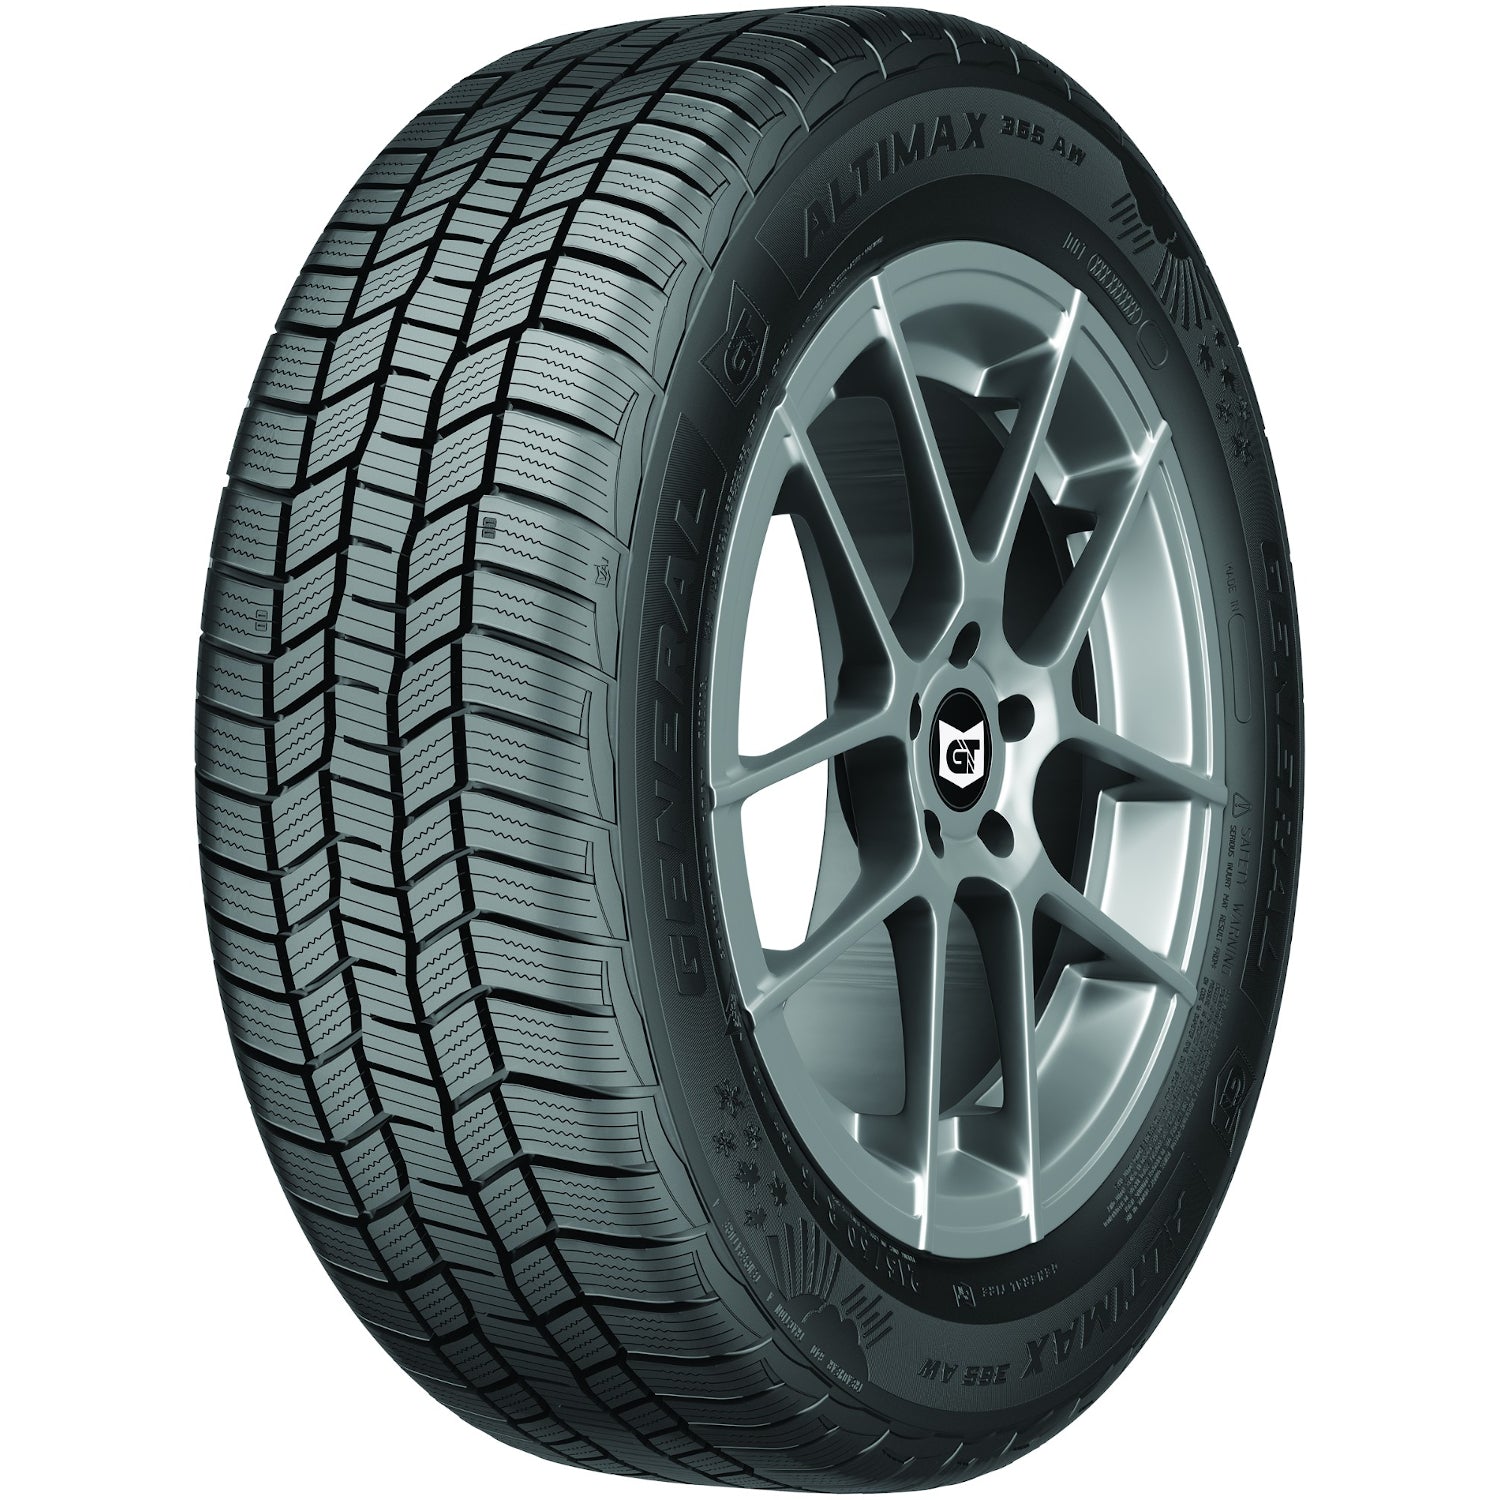 GENERAL ALTIMAX 365AW 225/60R16 (26.6X8.9R 16) Tires